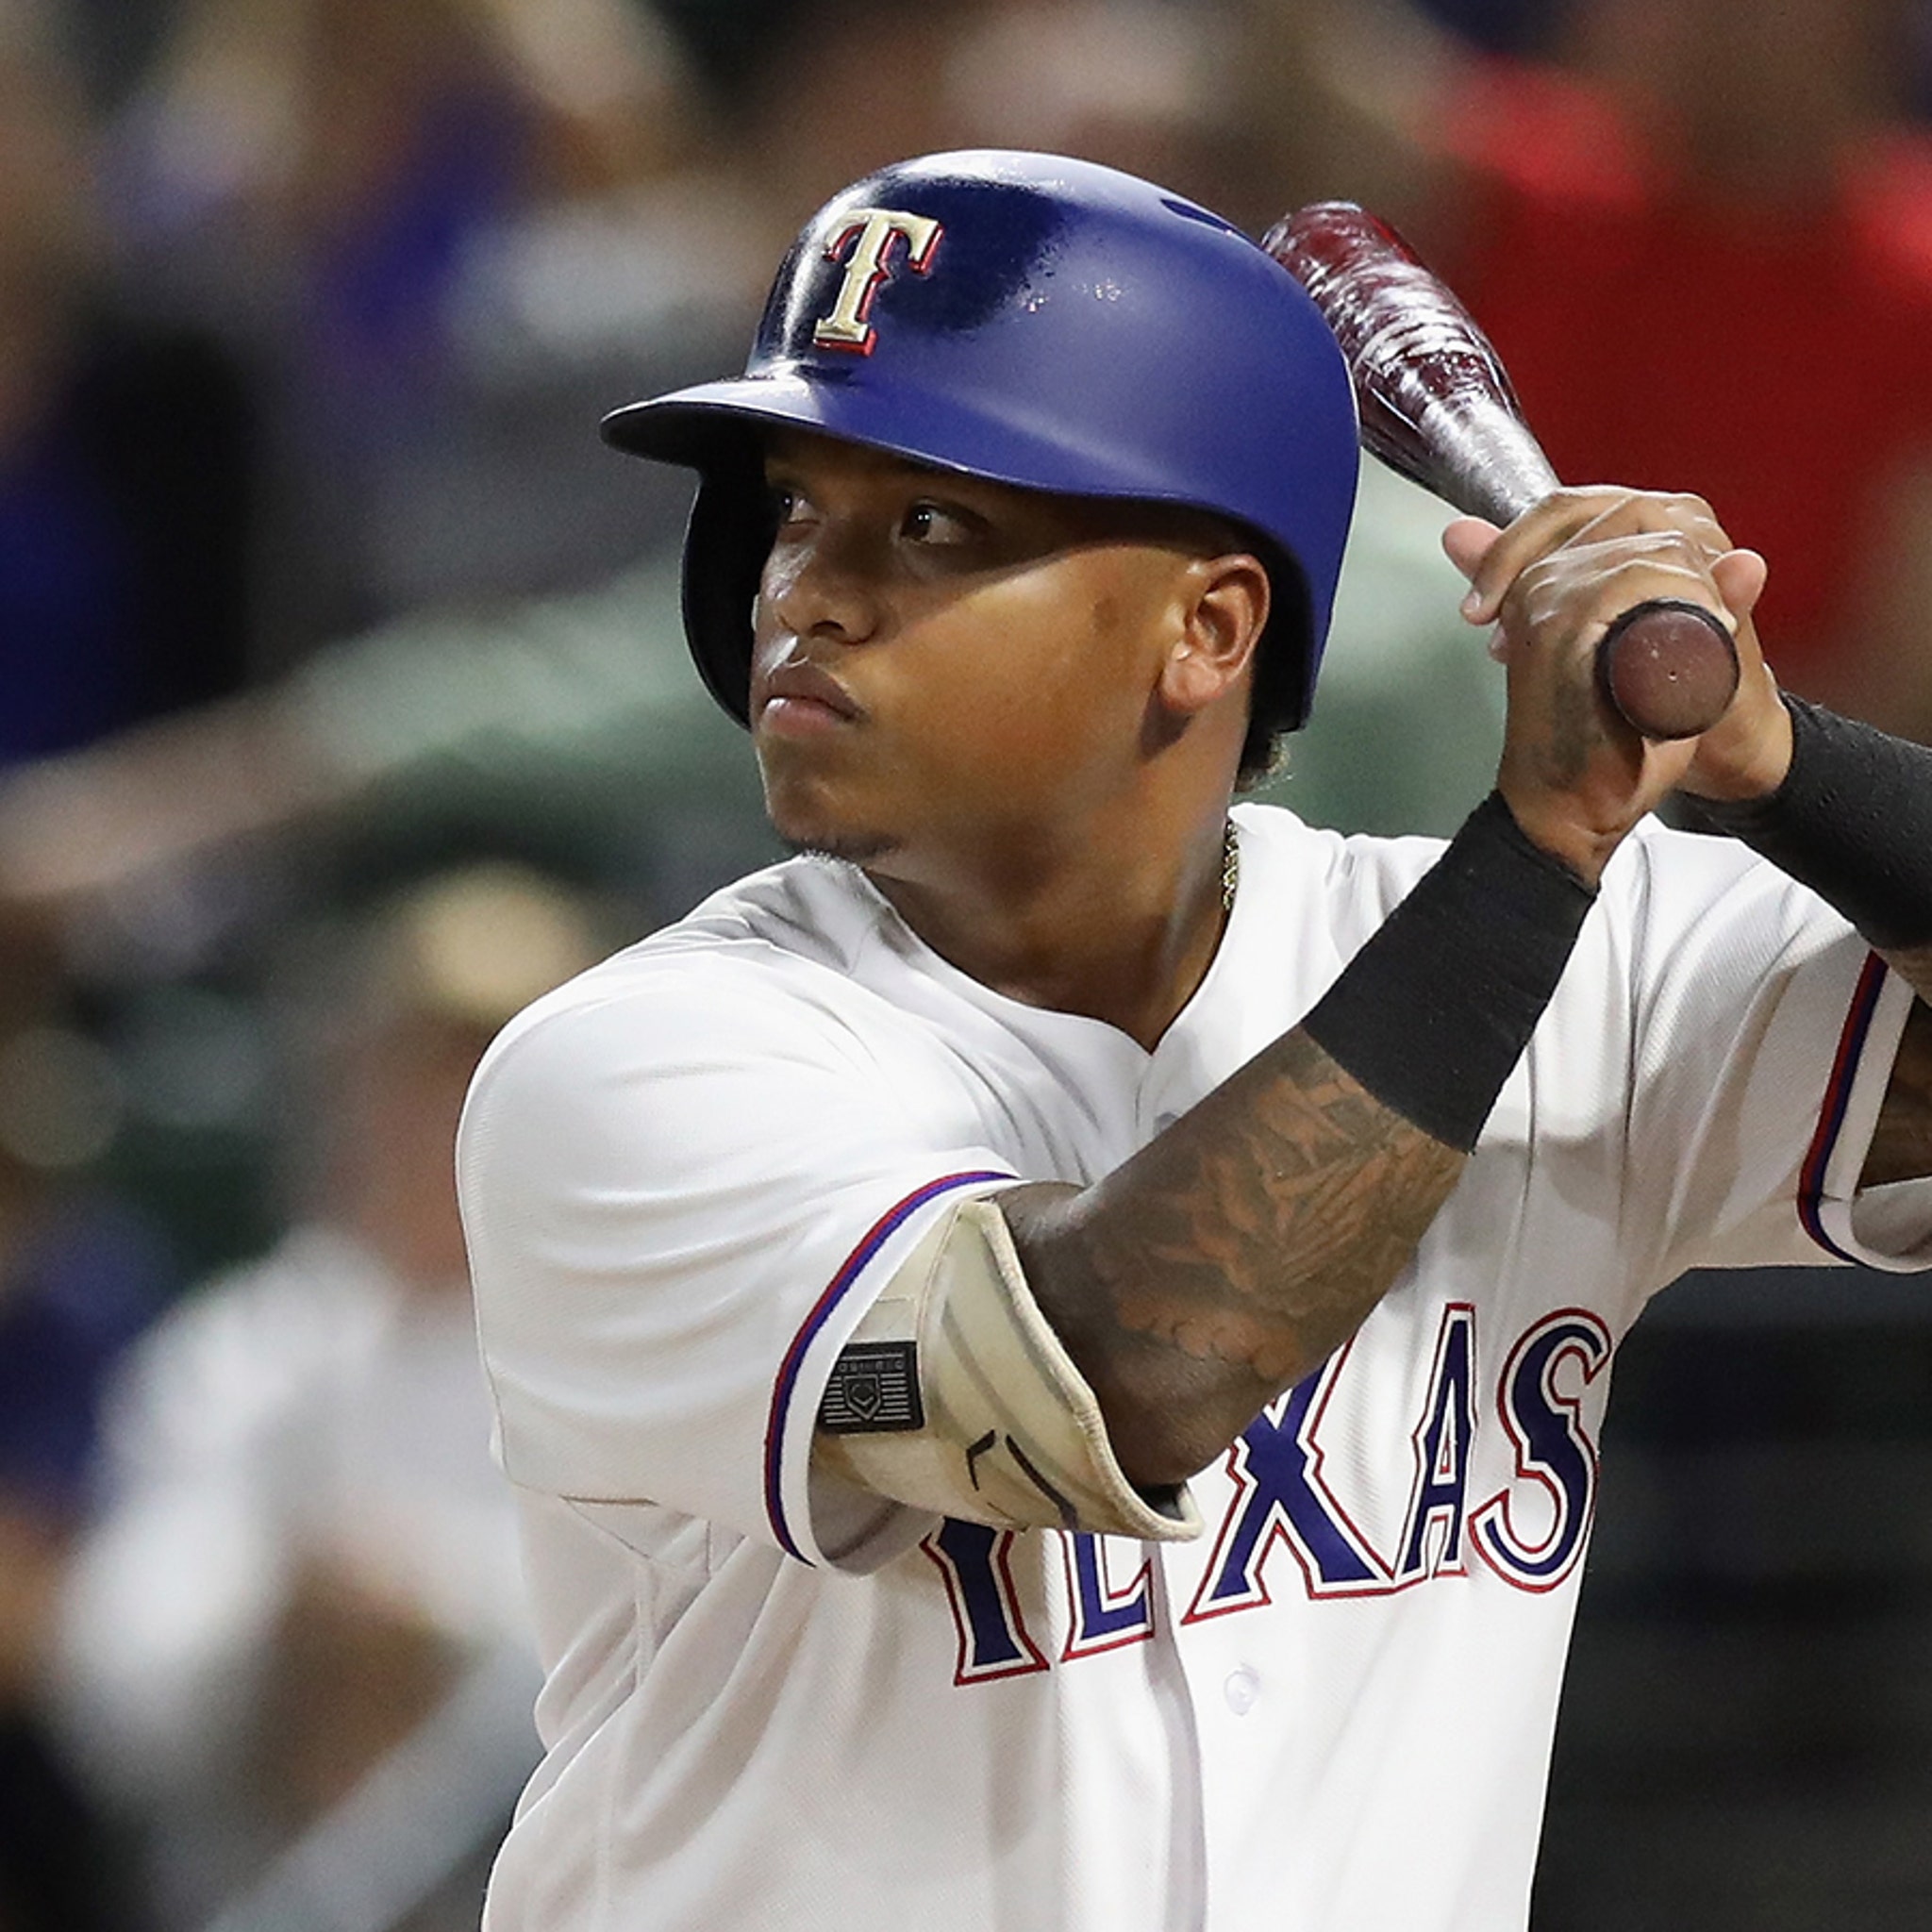 Texas Rangers' Willie Calhoun breaks jaw after being hit by pitch